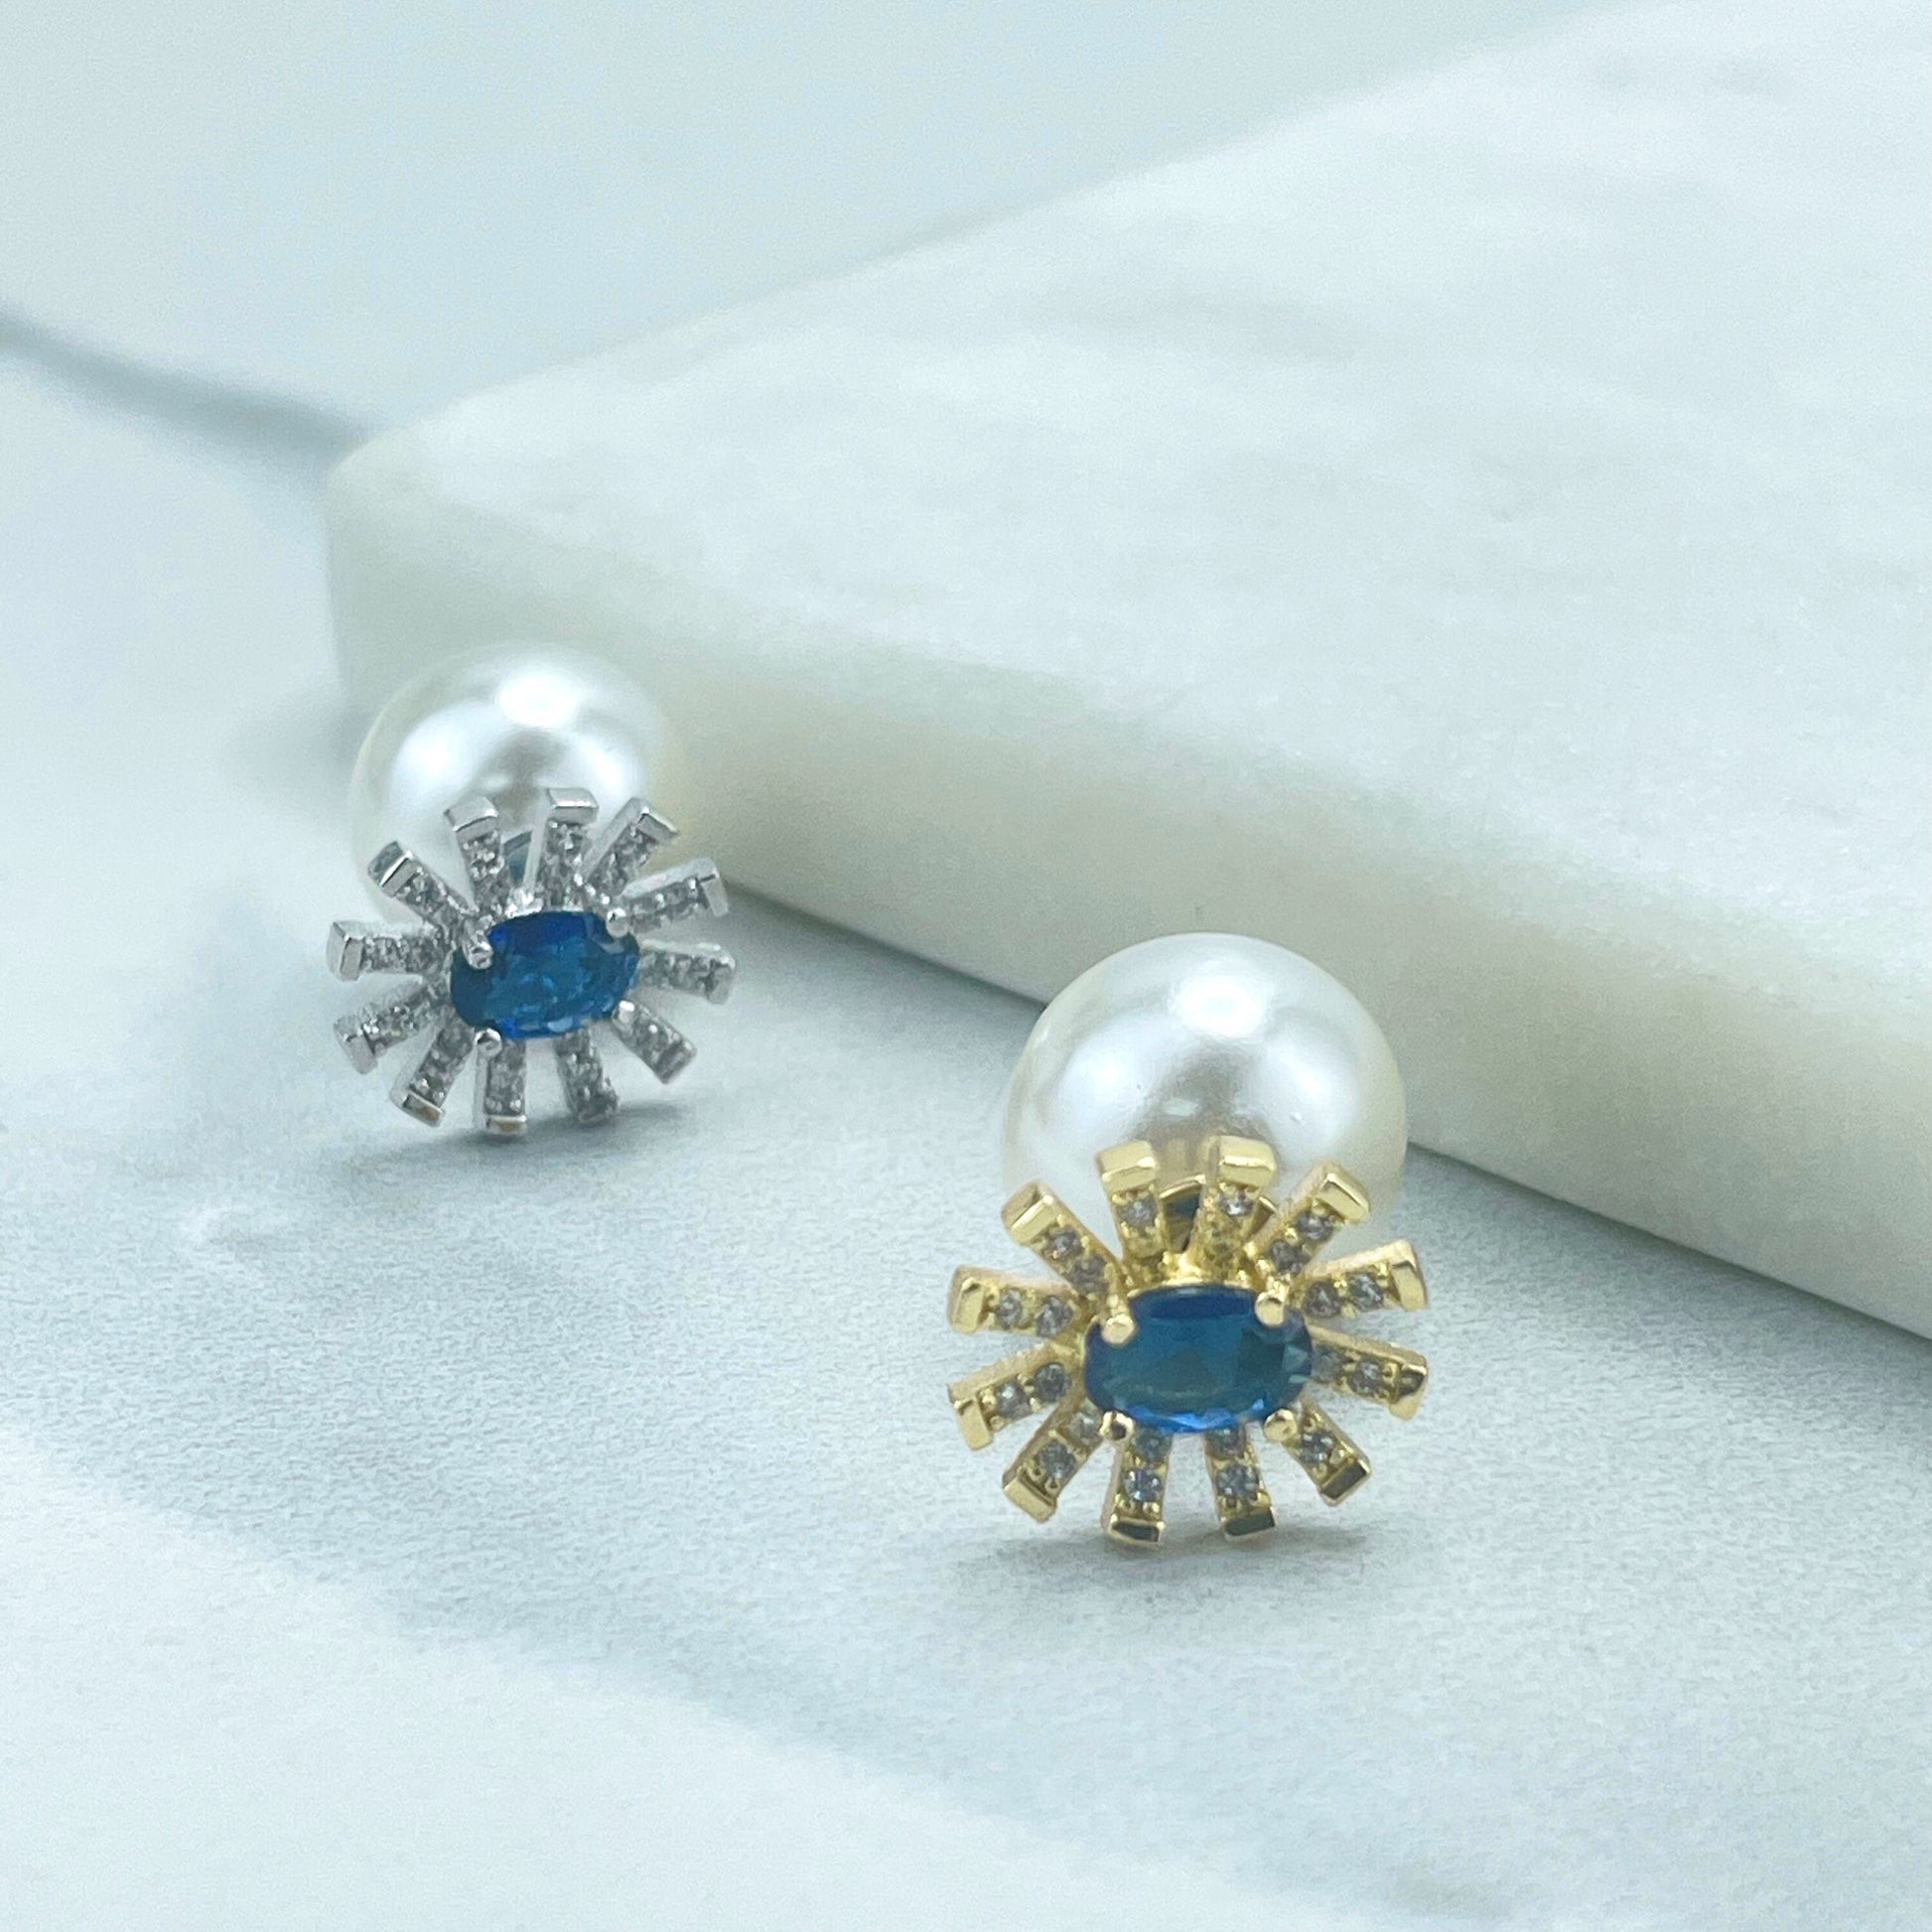 18k Gold Filled or Silver Filled, CZ Flower Design with Simulated Pearl Closure, Front Back Stud Earrings, Double Sided Wholesale Jewelry